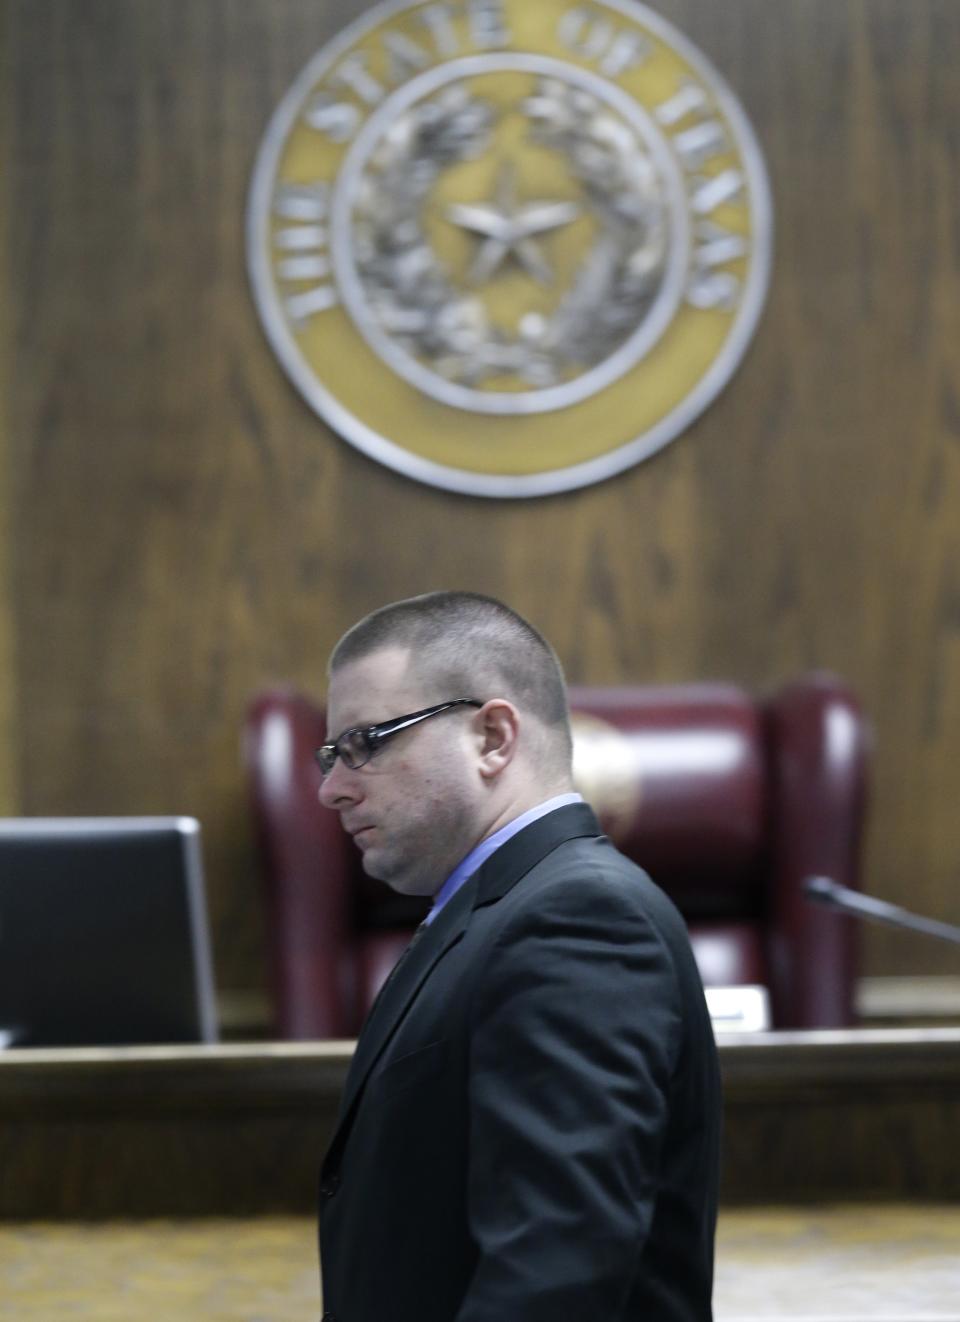 Eddie Ray Routh walks across the court  after a break during his capital murder trial at the Erath County, Donald R. Jones Justice Center Friday, Feb. 20, 2015, in Stephenville, Texas. Routh, 27, of Lancaster, is charged with the 2013 deaths of Navy SEAL Chris Kyle and his friend Chad Littlefield at a shooting range near Glen Rose, Texas. (AP Photo/LM Otero,Pool)